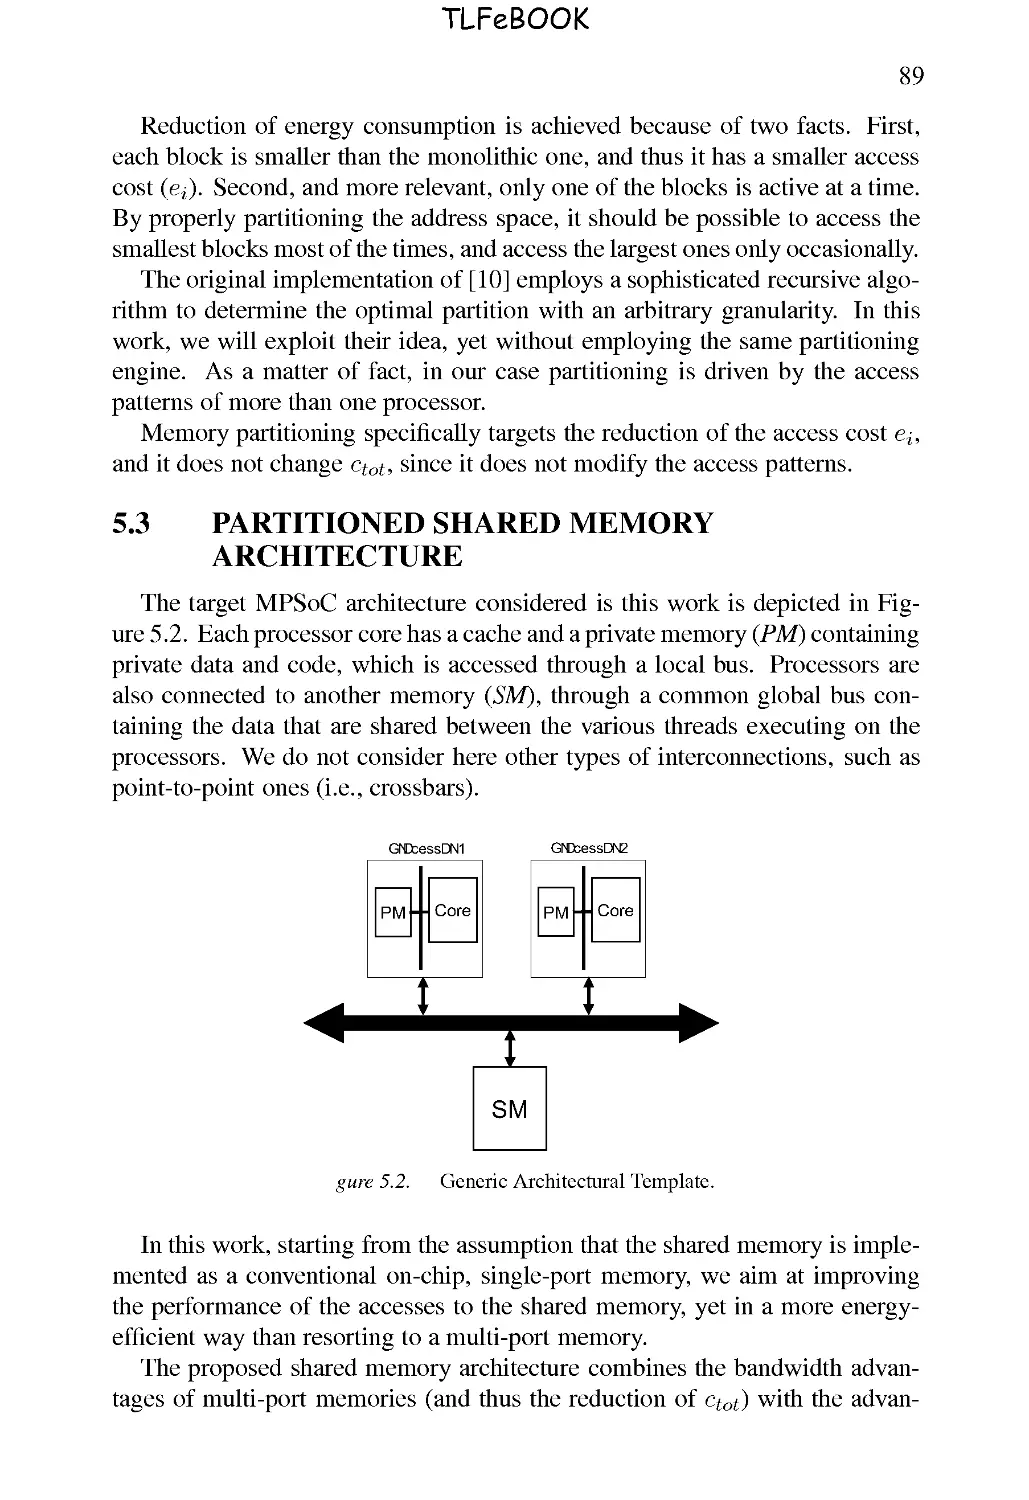 5.3 PARTITIONED SHARED MEMORY ARCHITECTURE